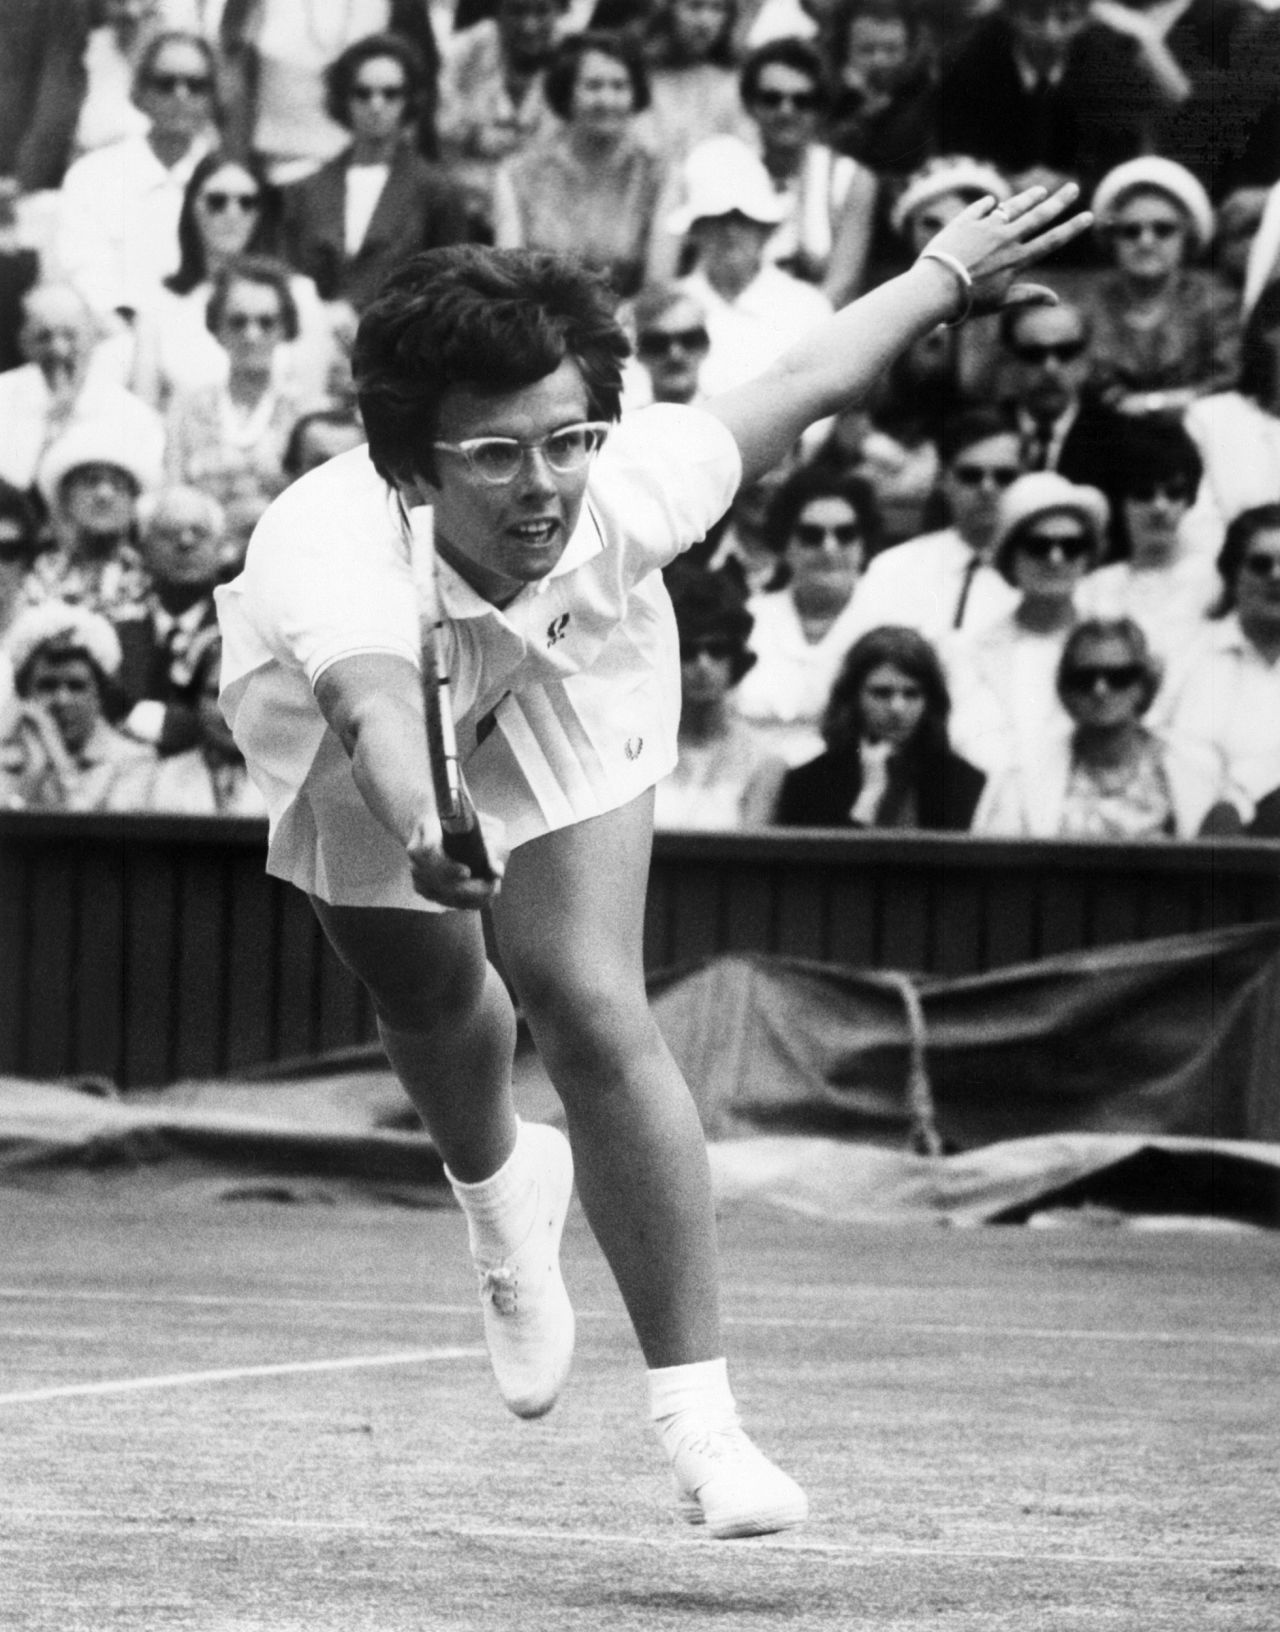 American tennis legend Billie-Jean King, who lifted her first Wimbledon title eight years after Gibson retired, says her compatriot was a great inspiration -- a "she-ro" -- and she helped raise $50,000 to make her later life more comfortable. Gibson made no money in tennis and suffered ill health in her declining years.